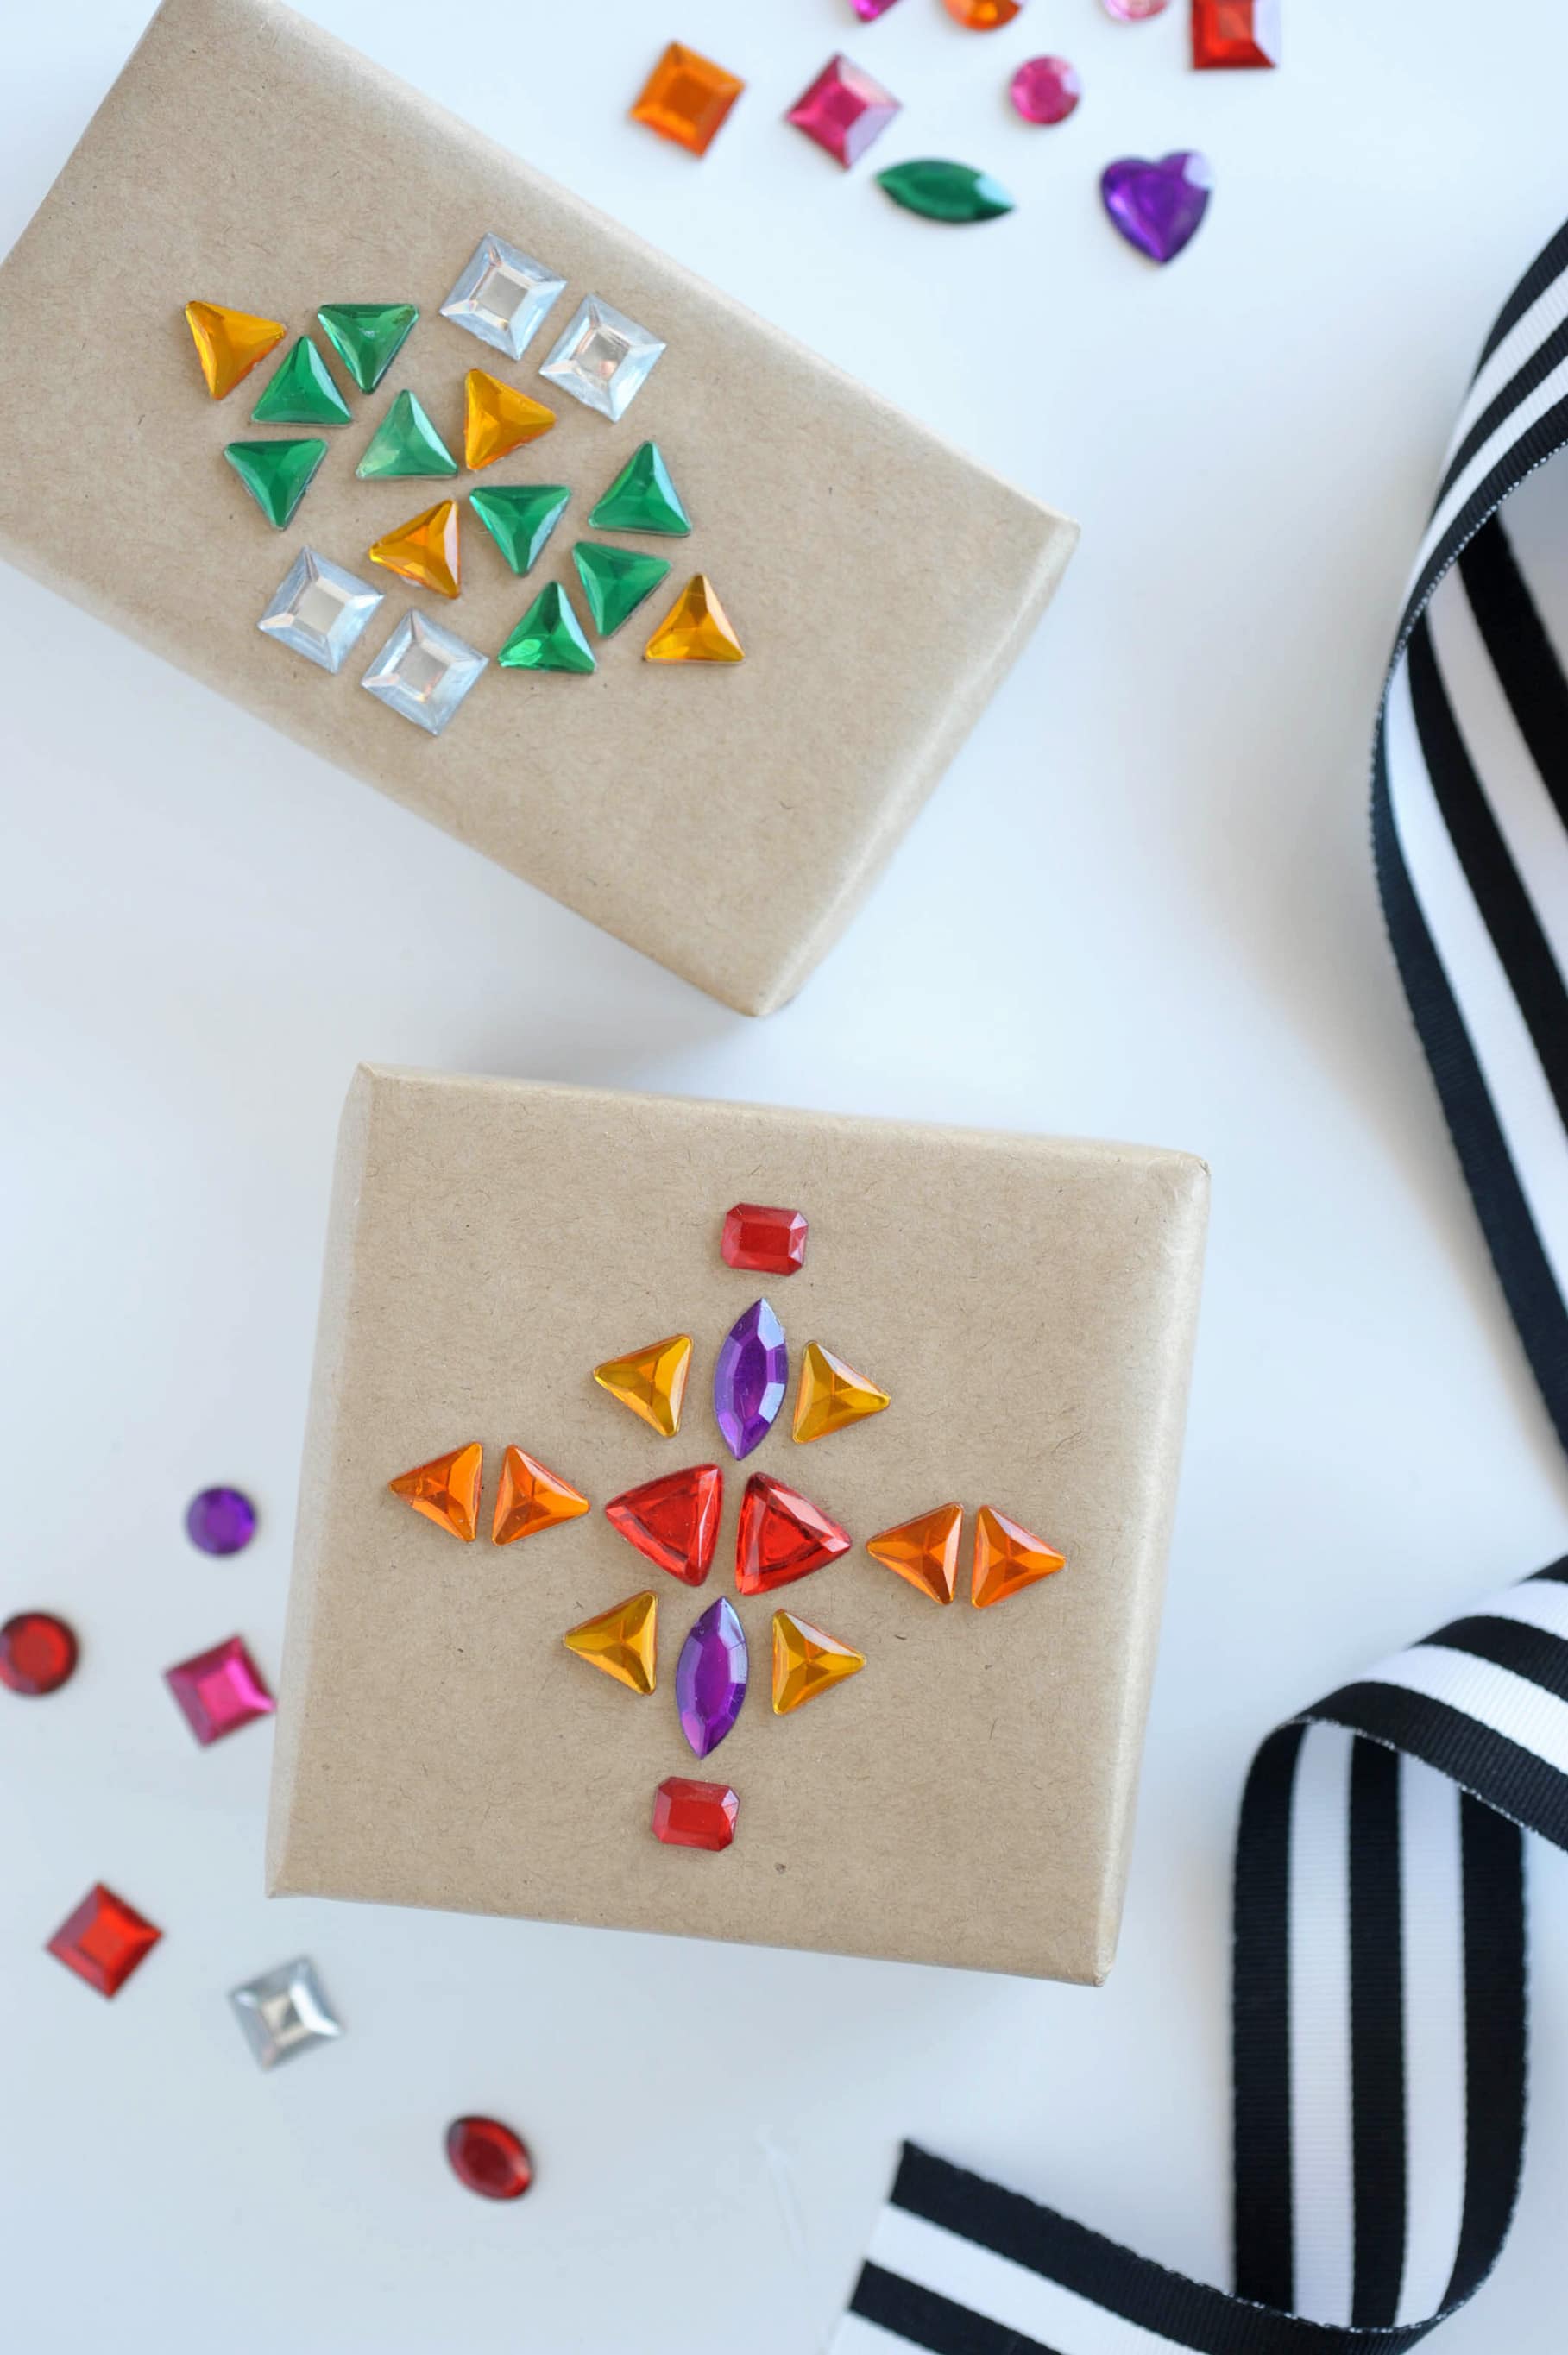 Add some color and pattern to make your gift wrap special!